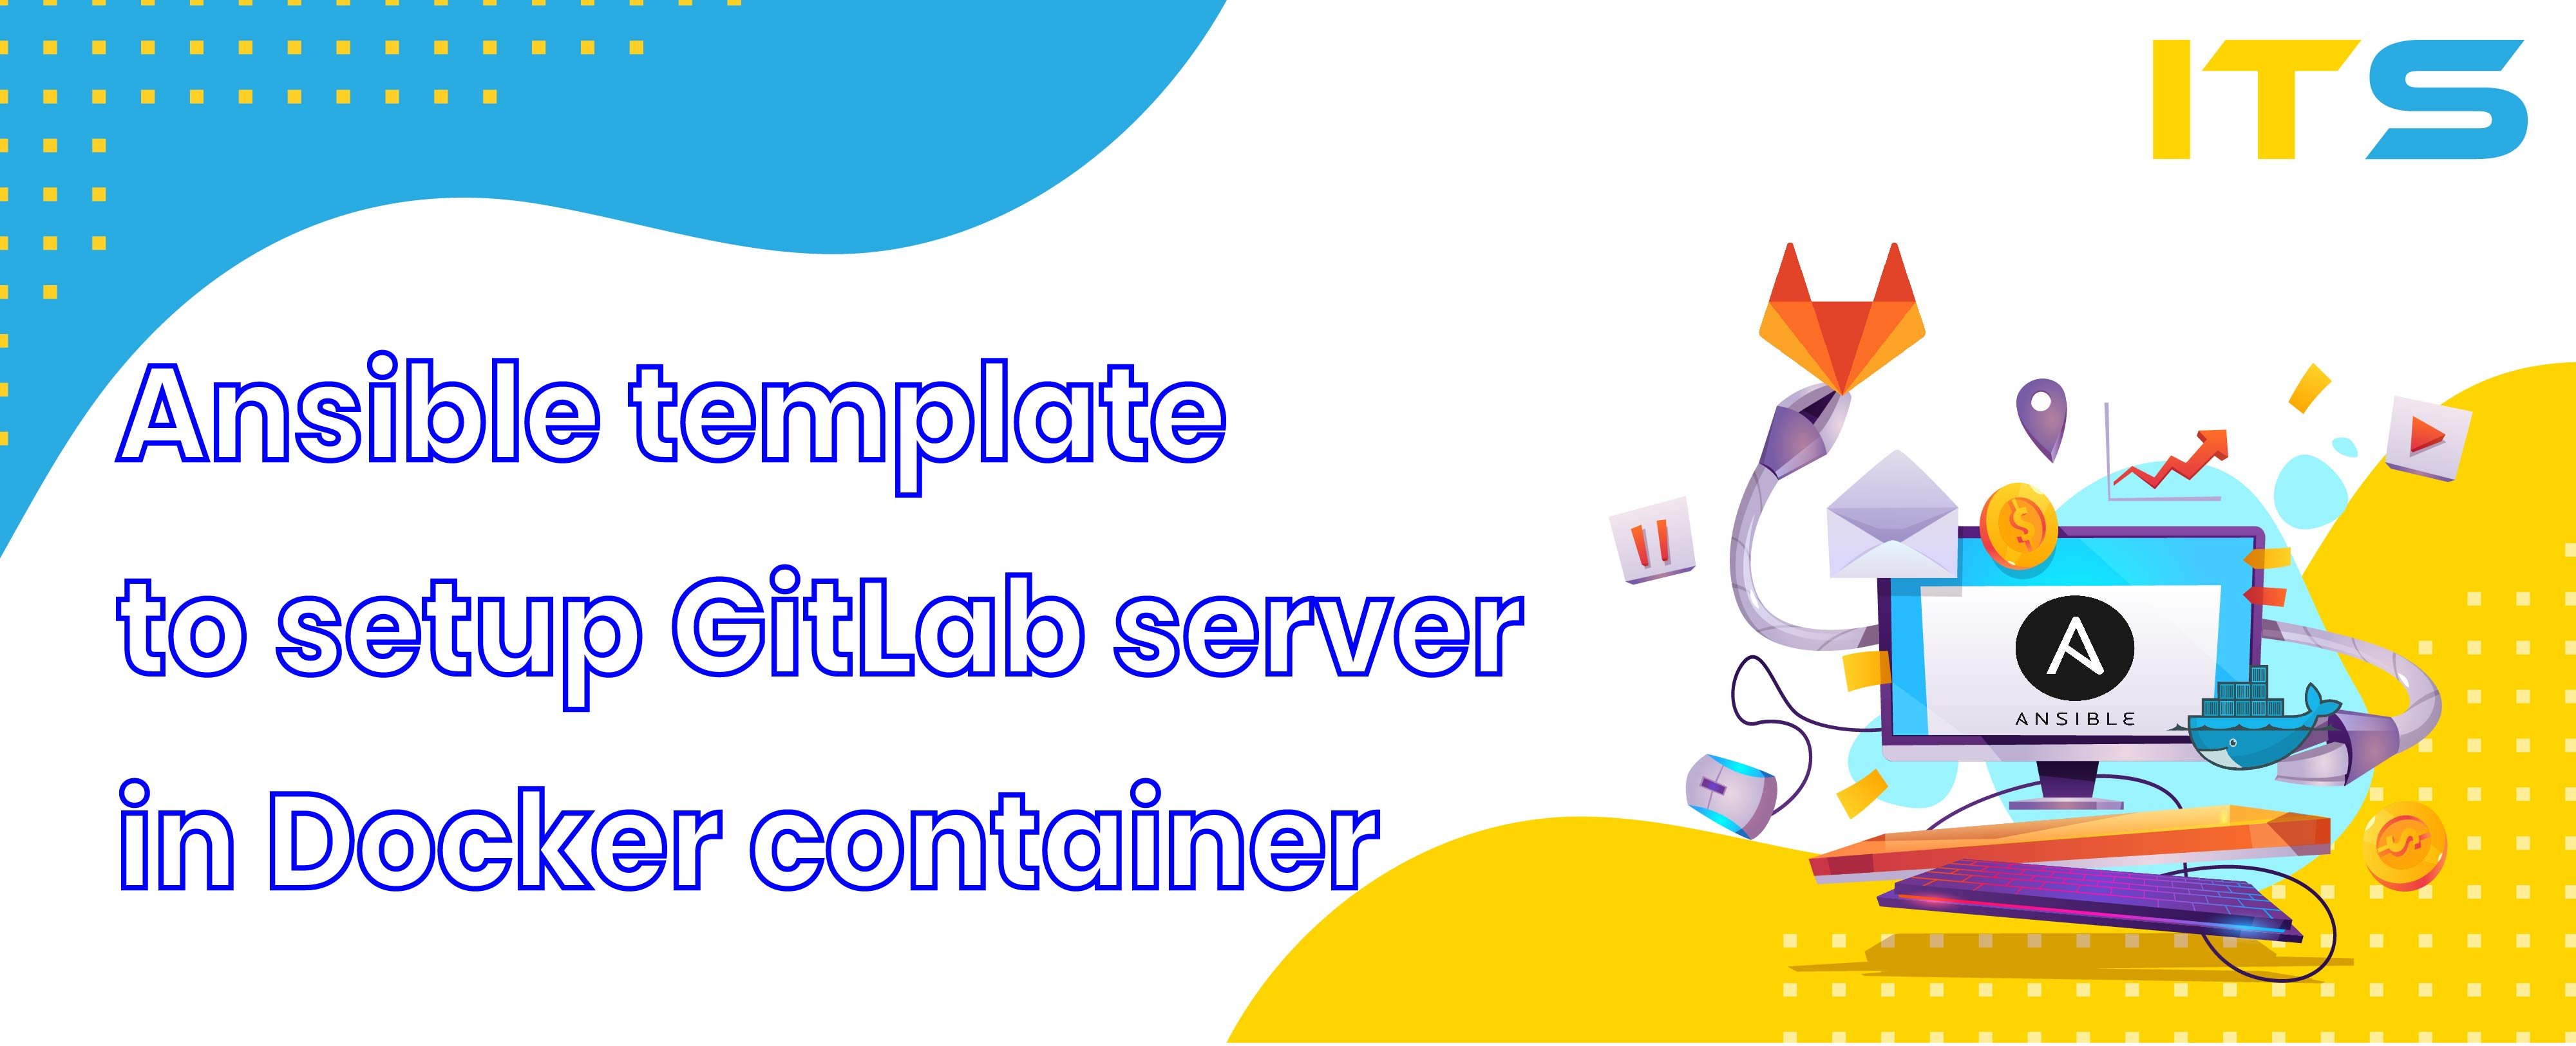 Ansible template to setup GitLab server in Docker container